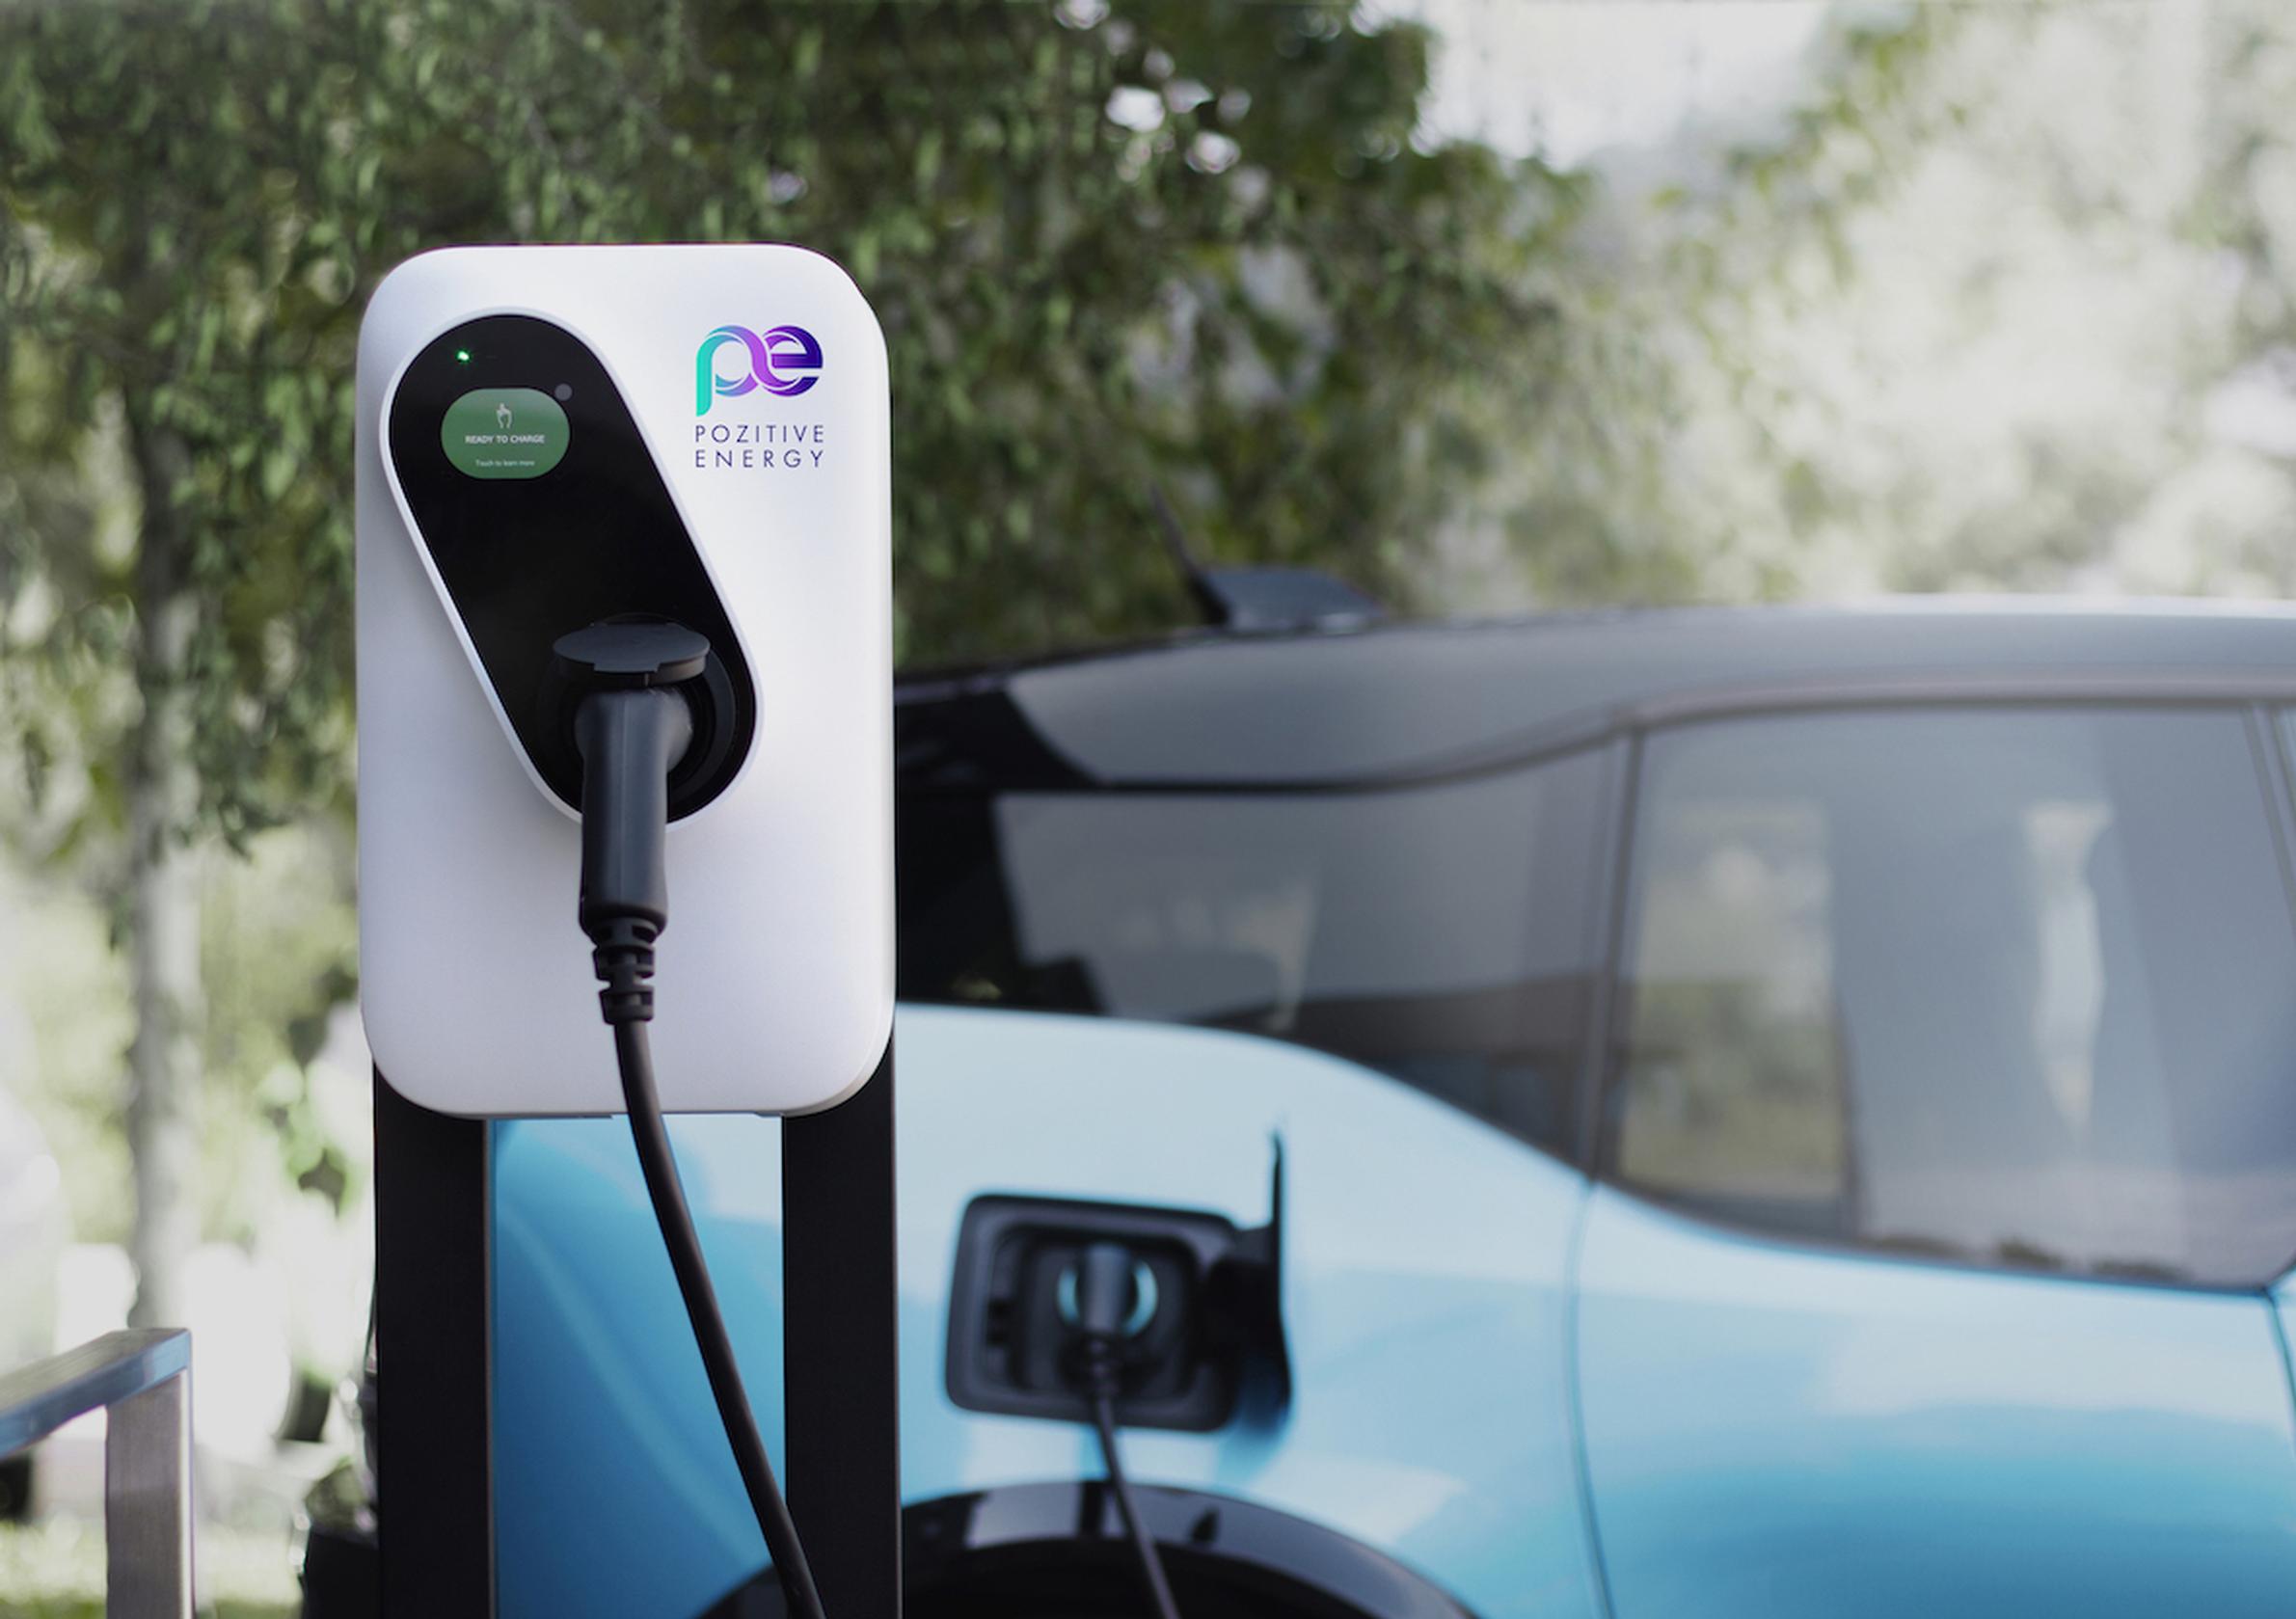 A Landis+Gyr chargepoint supplied by Positive Energy